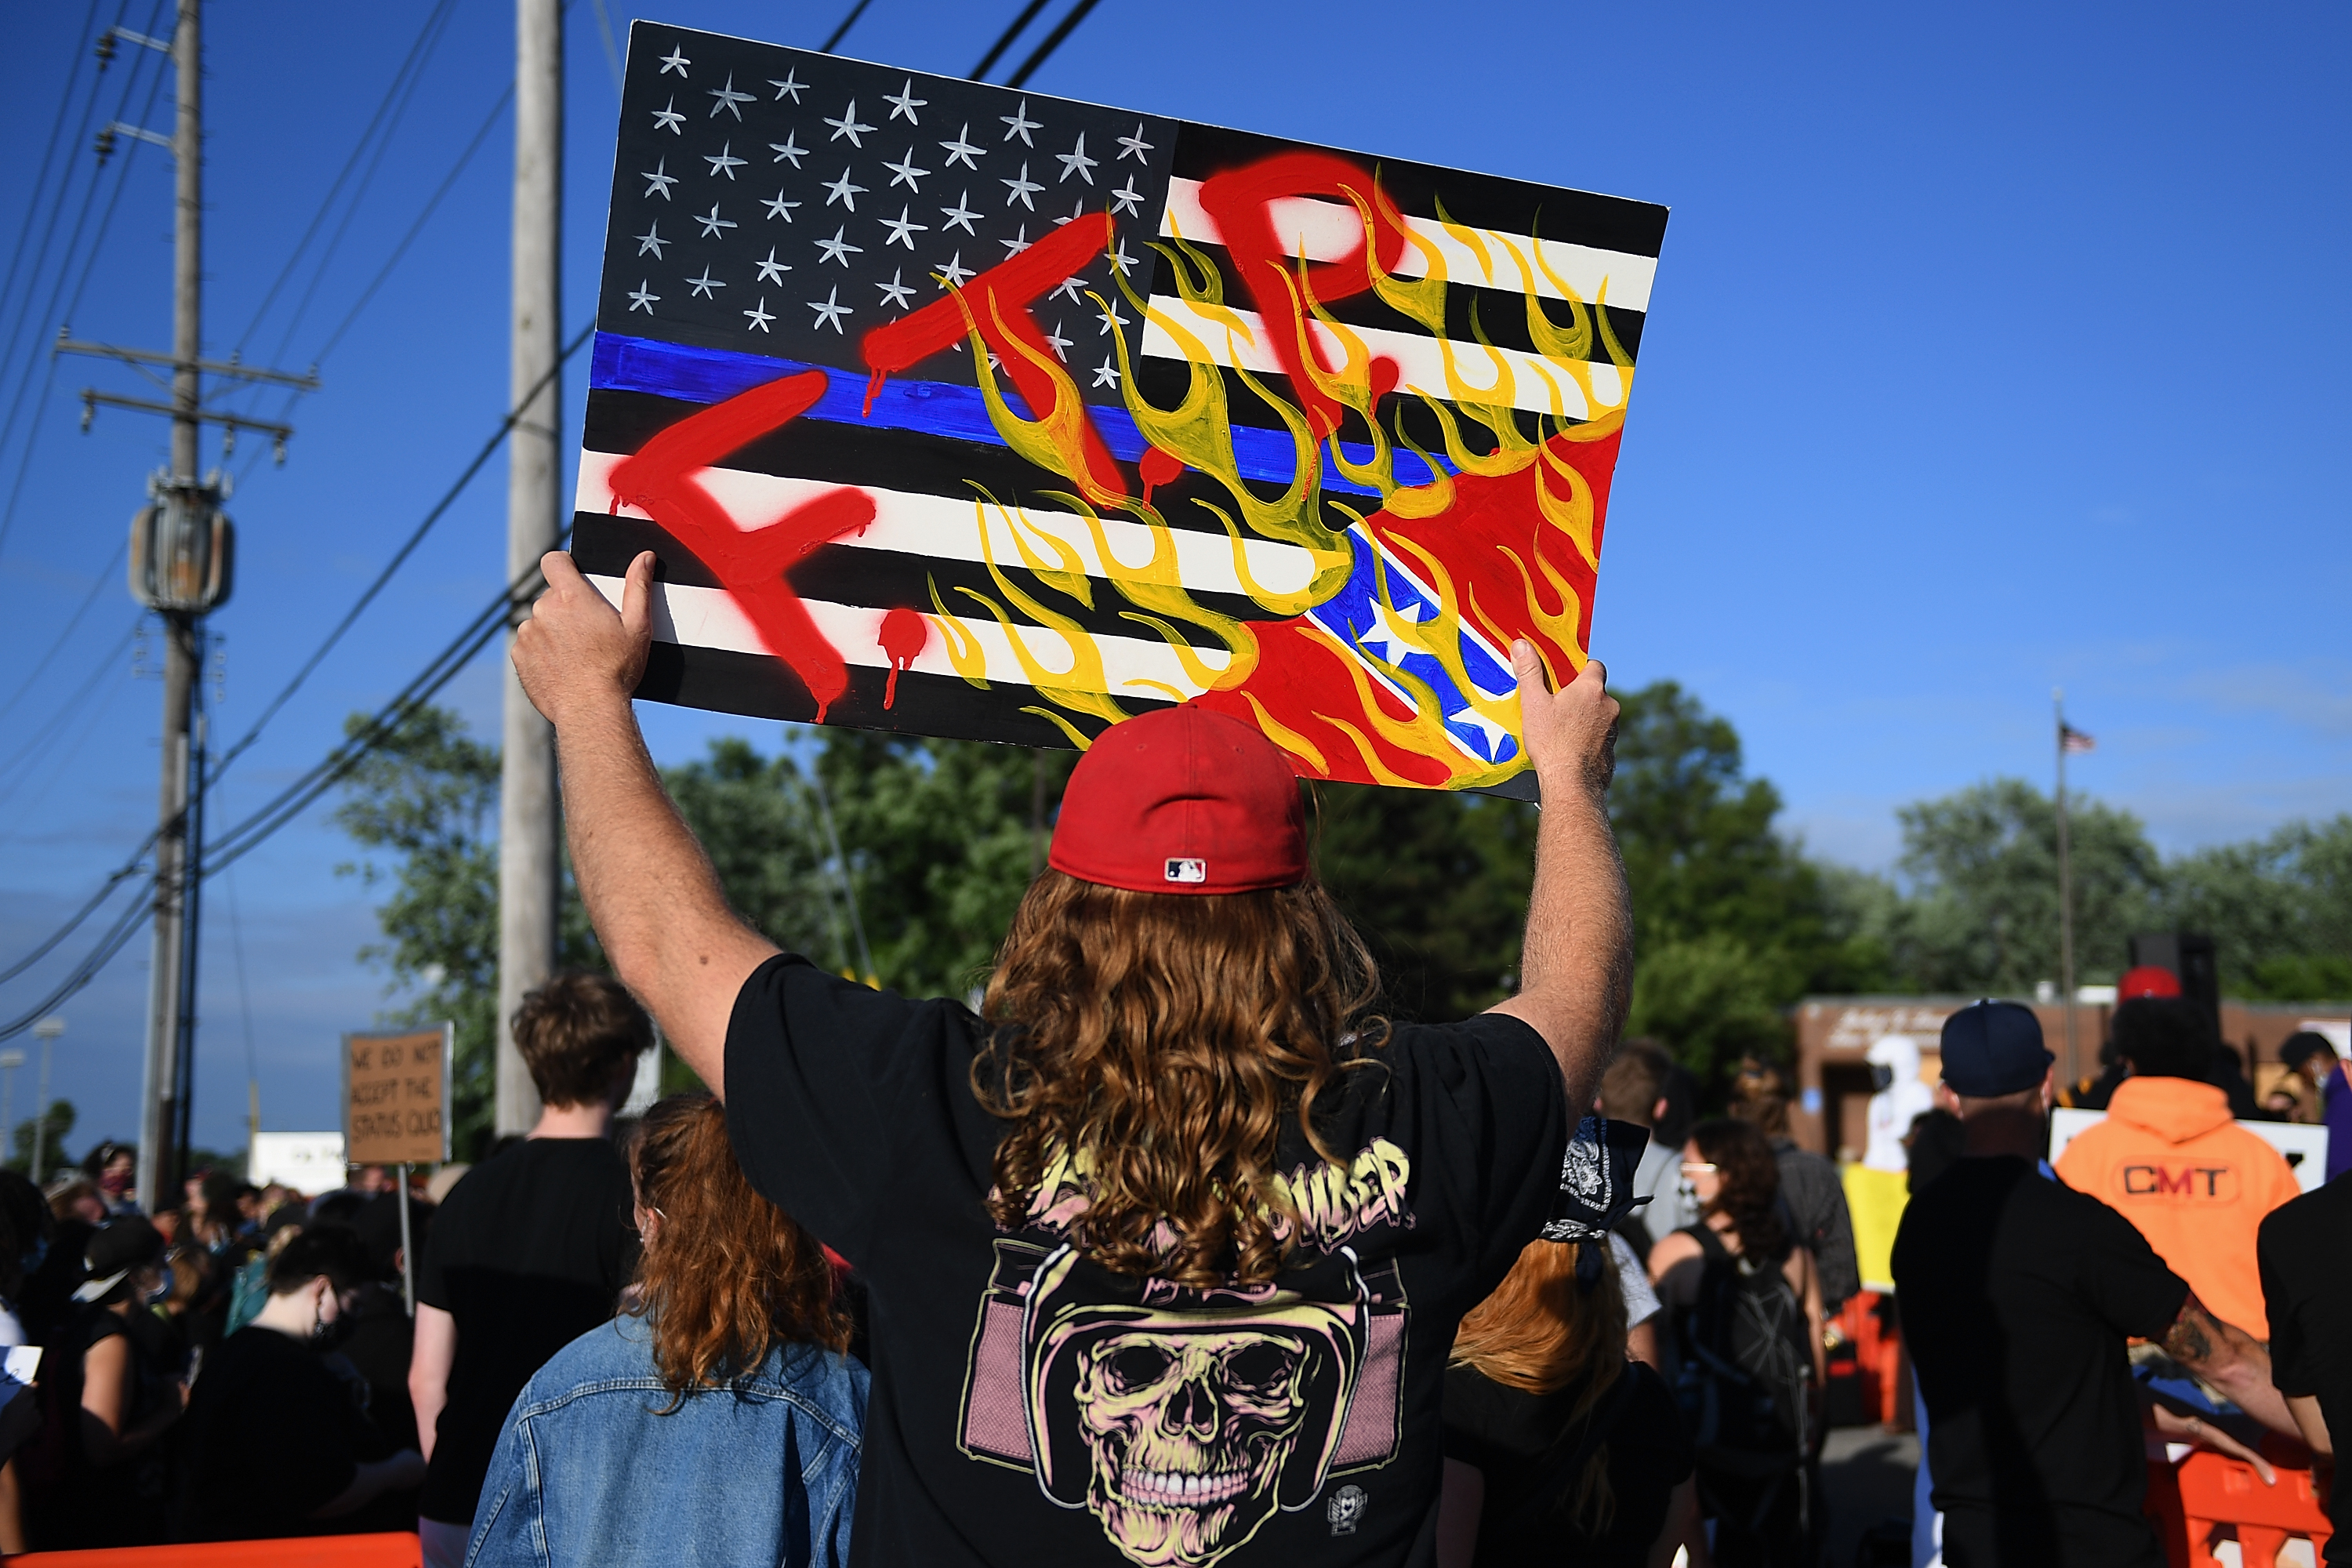 Protesters demonstrate during a protest against racism and police brutality at the Florissant Police Department on June 10, 2020 in Florissant, Missouri. (Photo: Michael B. Thomas/Getty Images)